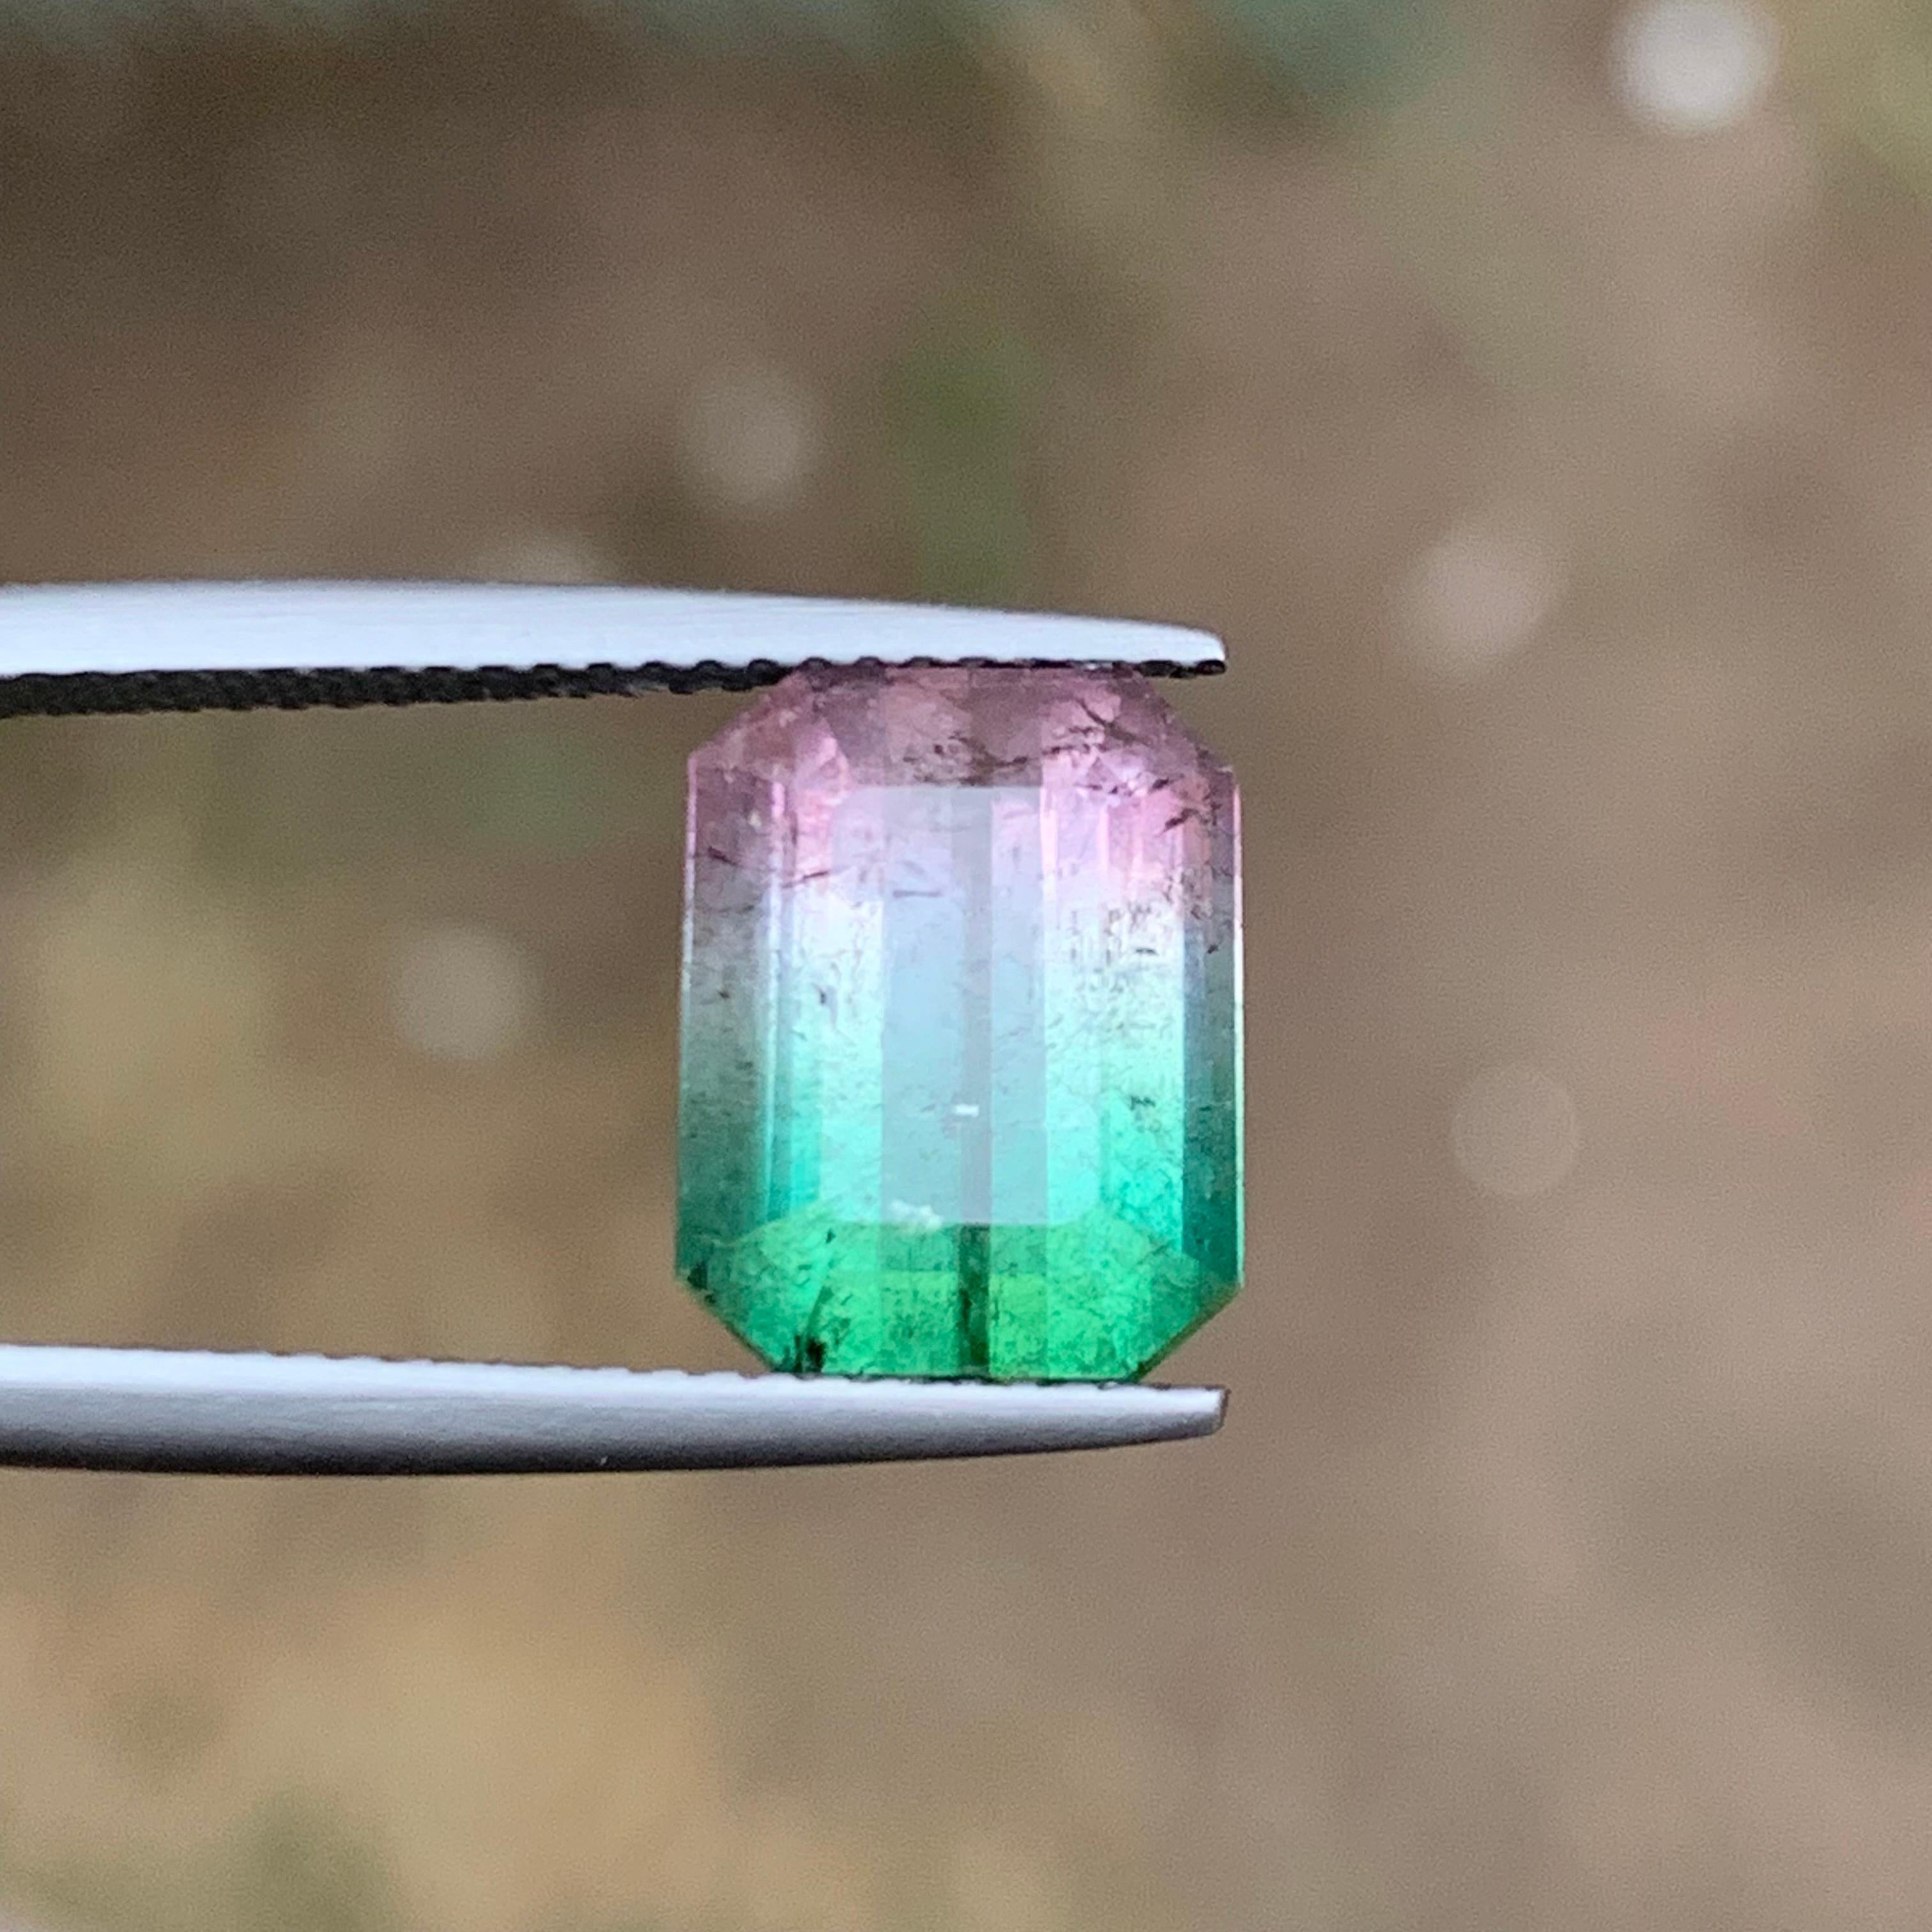 Rare Bicolor Watermelon Bluish Green & Pink Tourmaline Gemstone 5.90 Ct for Ring For Sale 2